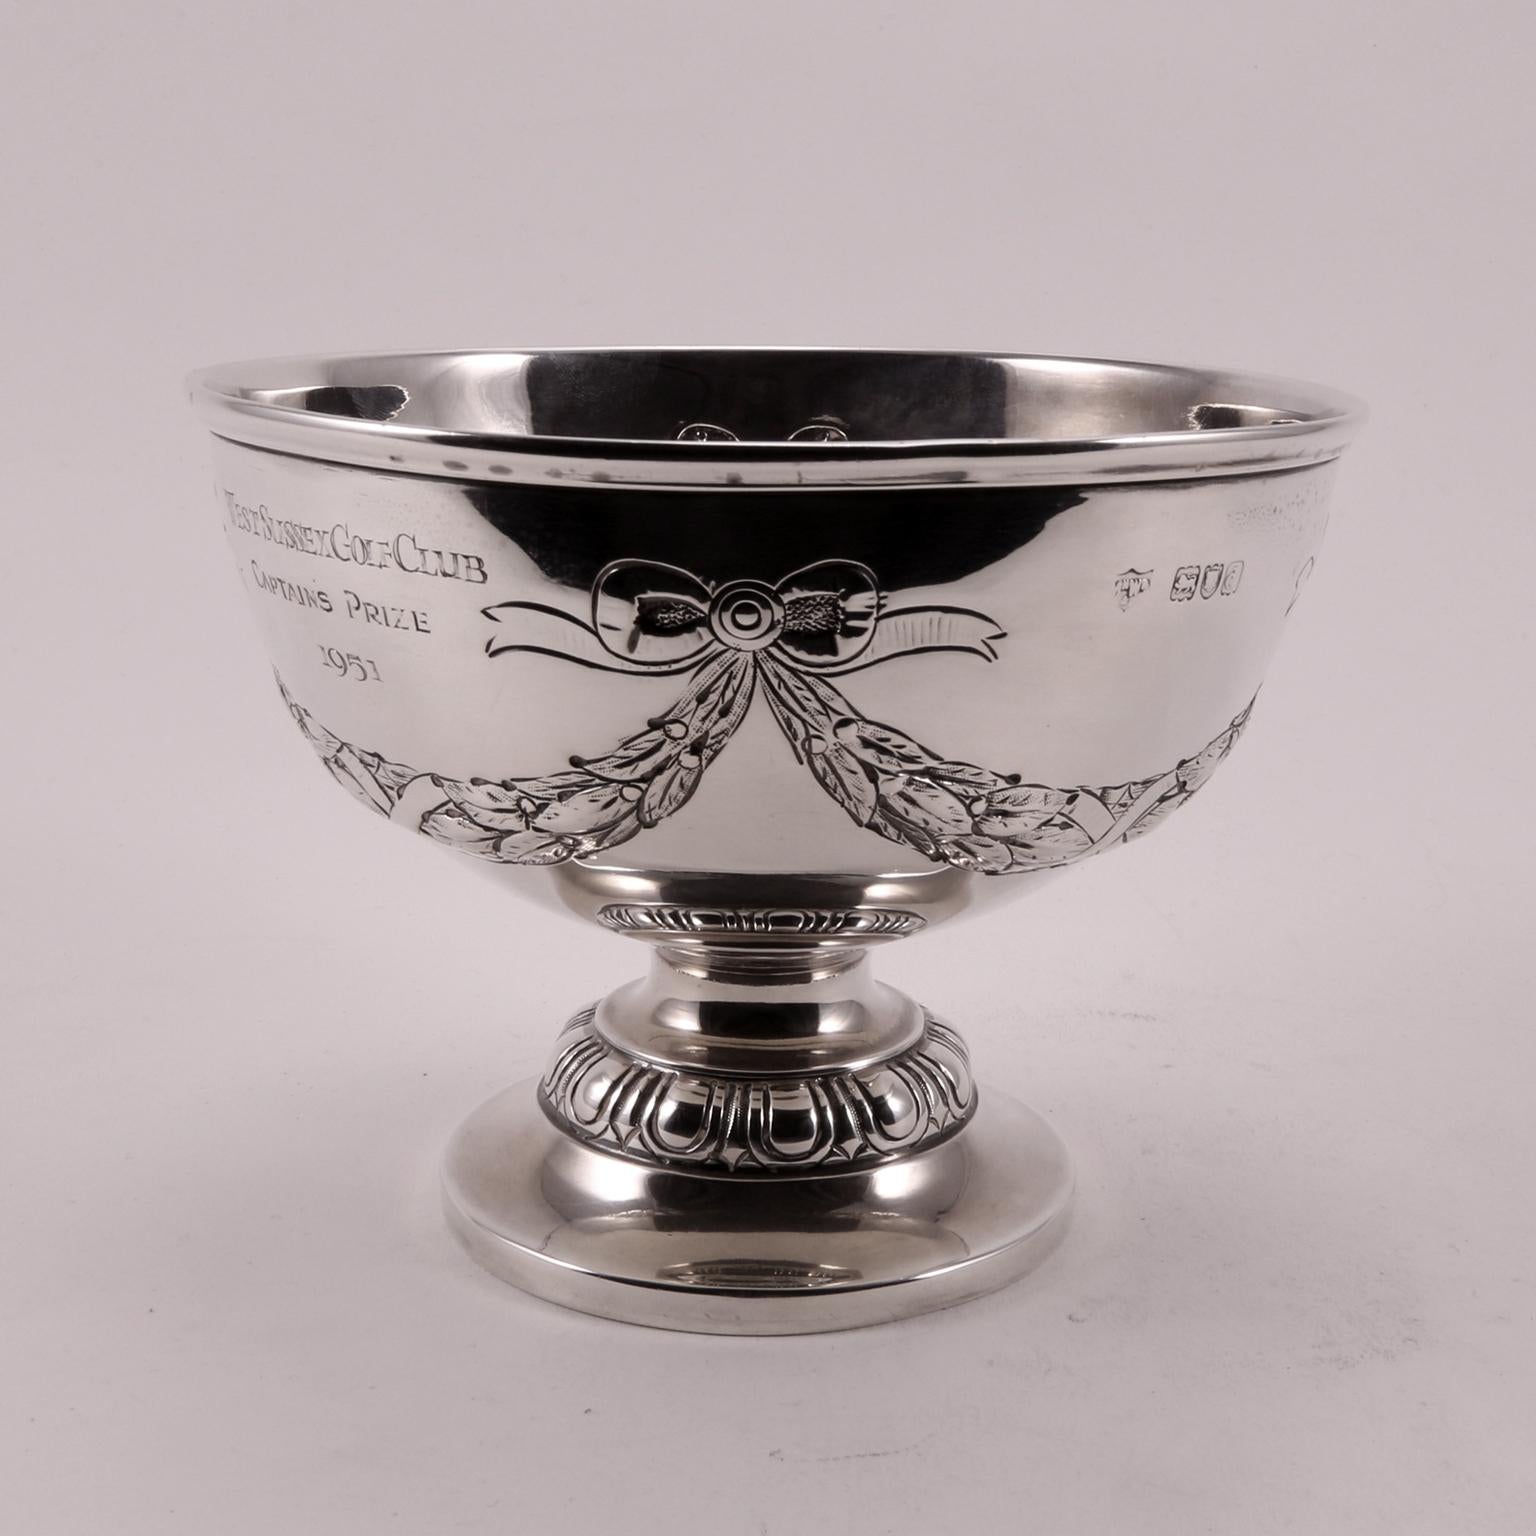 Rare 1896 cup, decorated with charming bows, produced by Mappin & Webb for F.G.L. F Aire and won by A.E.R. Gilligan. An historical moment of glory, impressed in the silver. Now it can be yours, after 120 years.